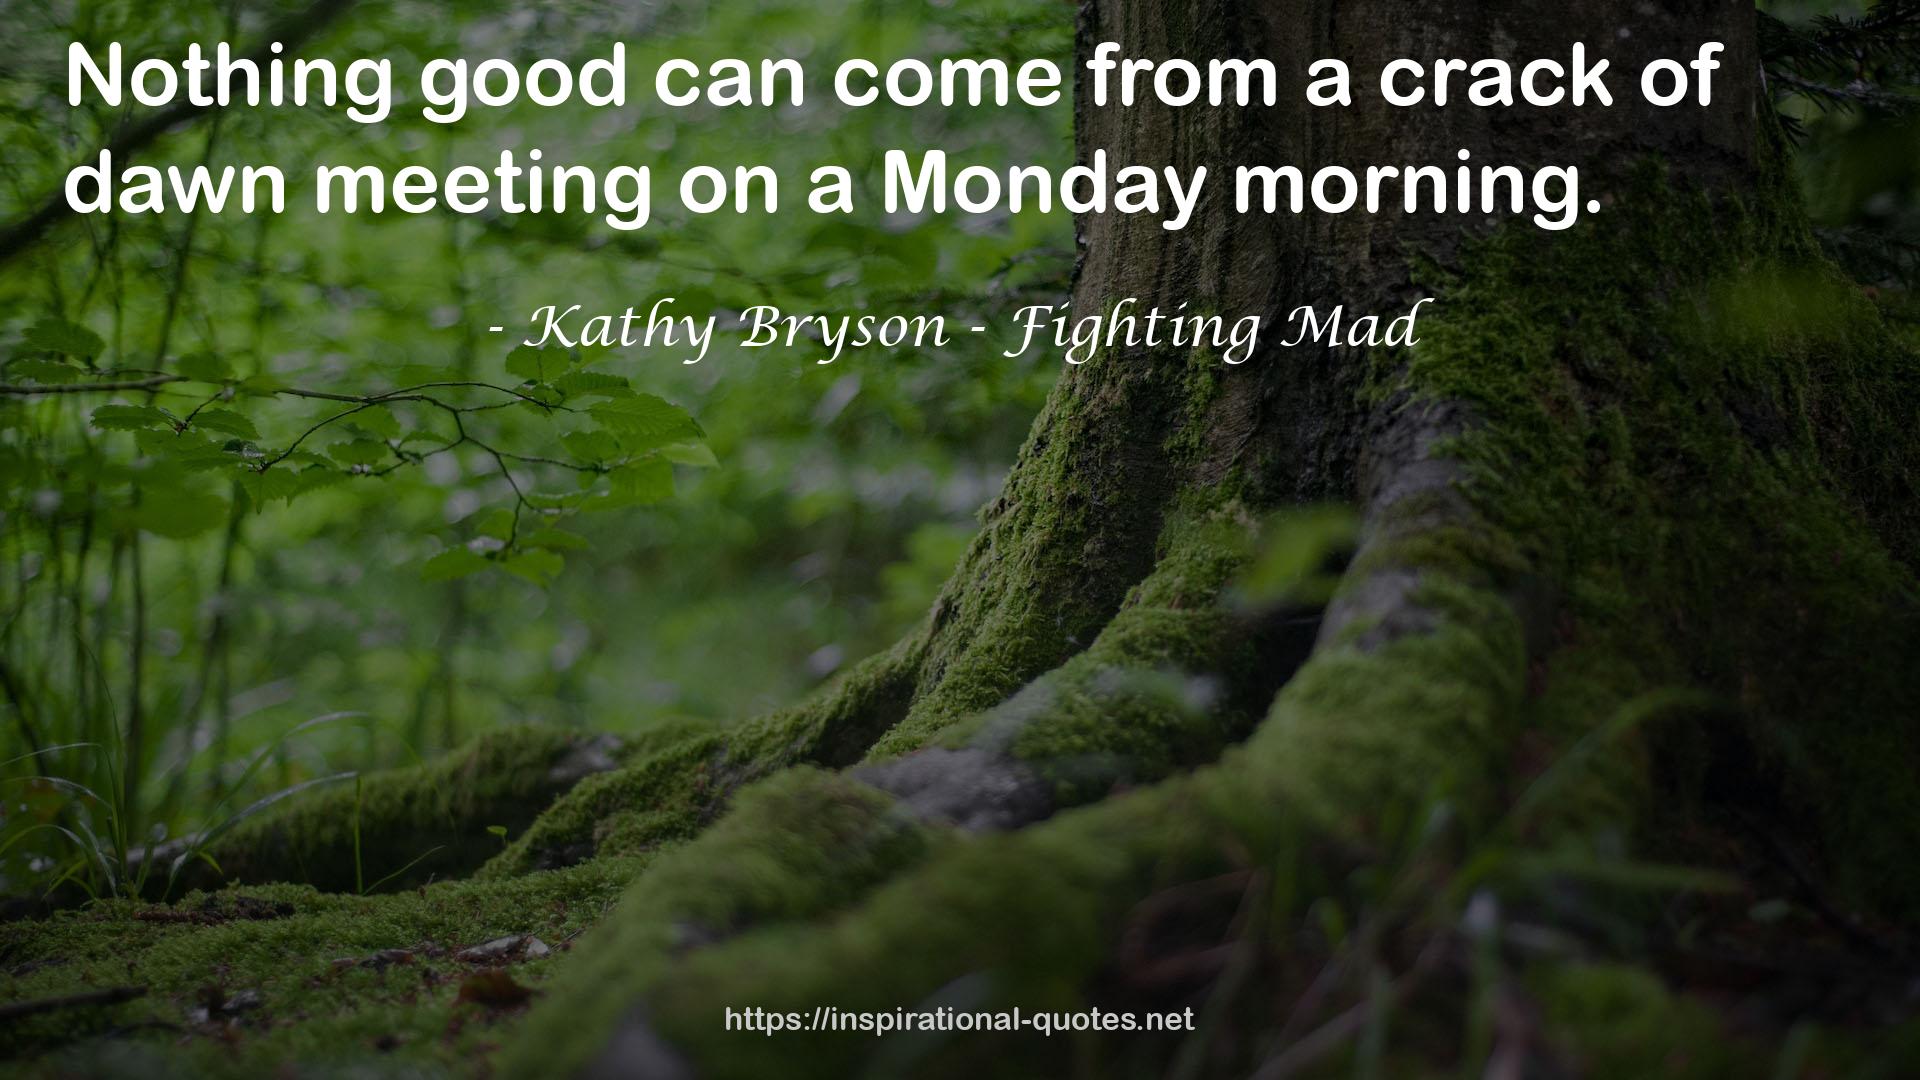 Kathy Bryson - Fighting Mad QUOTES